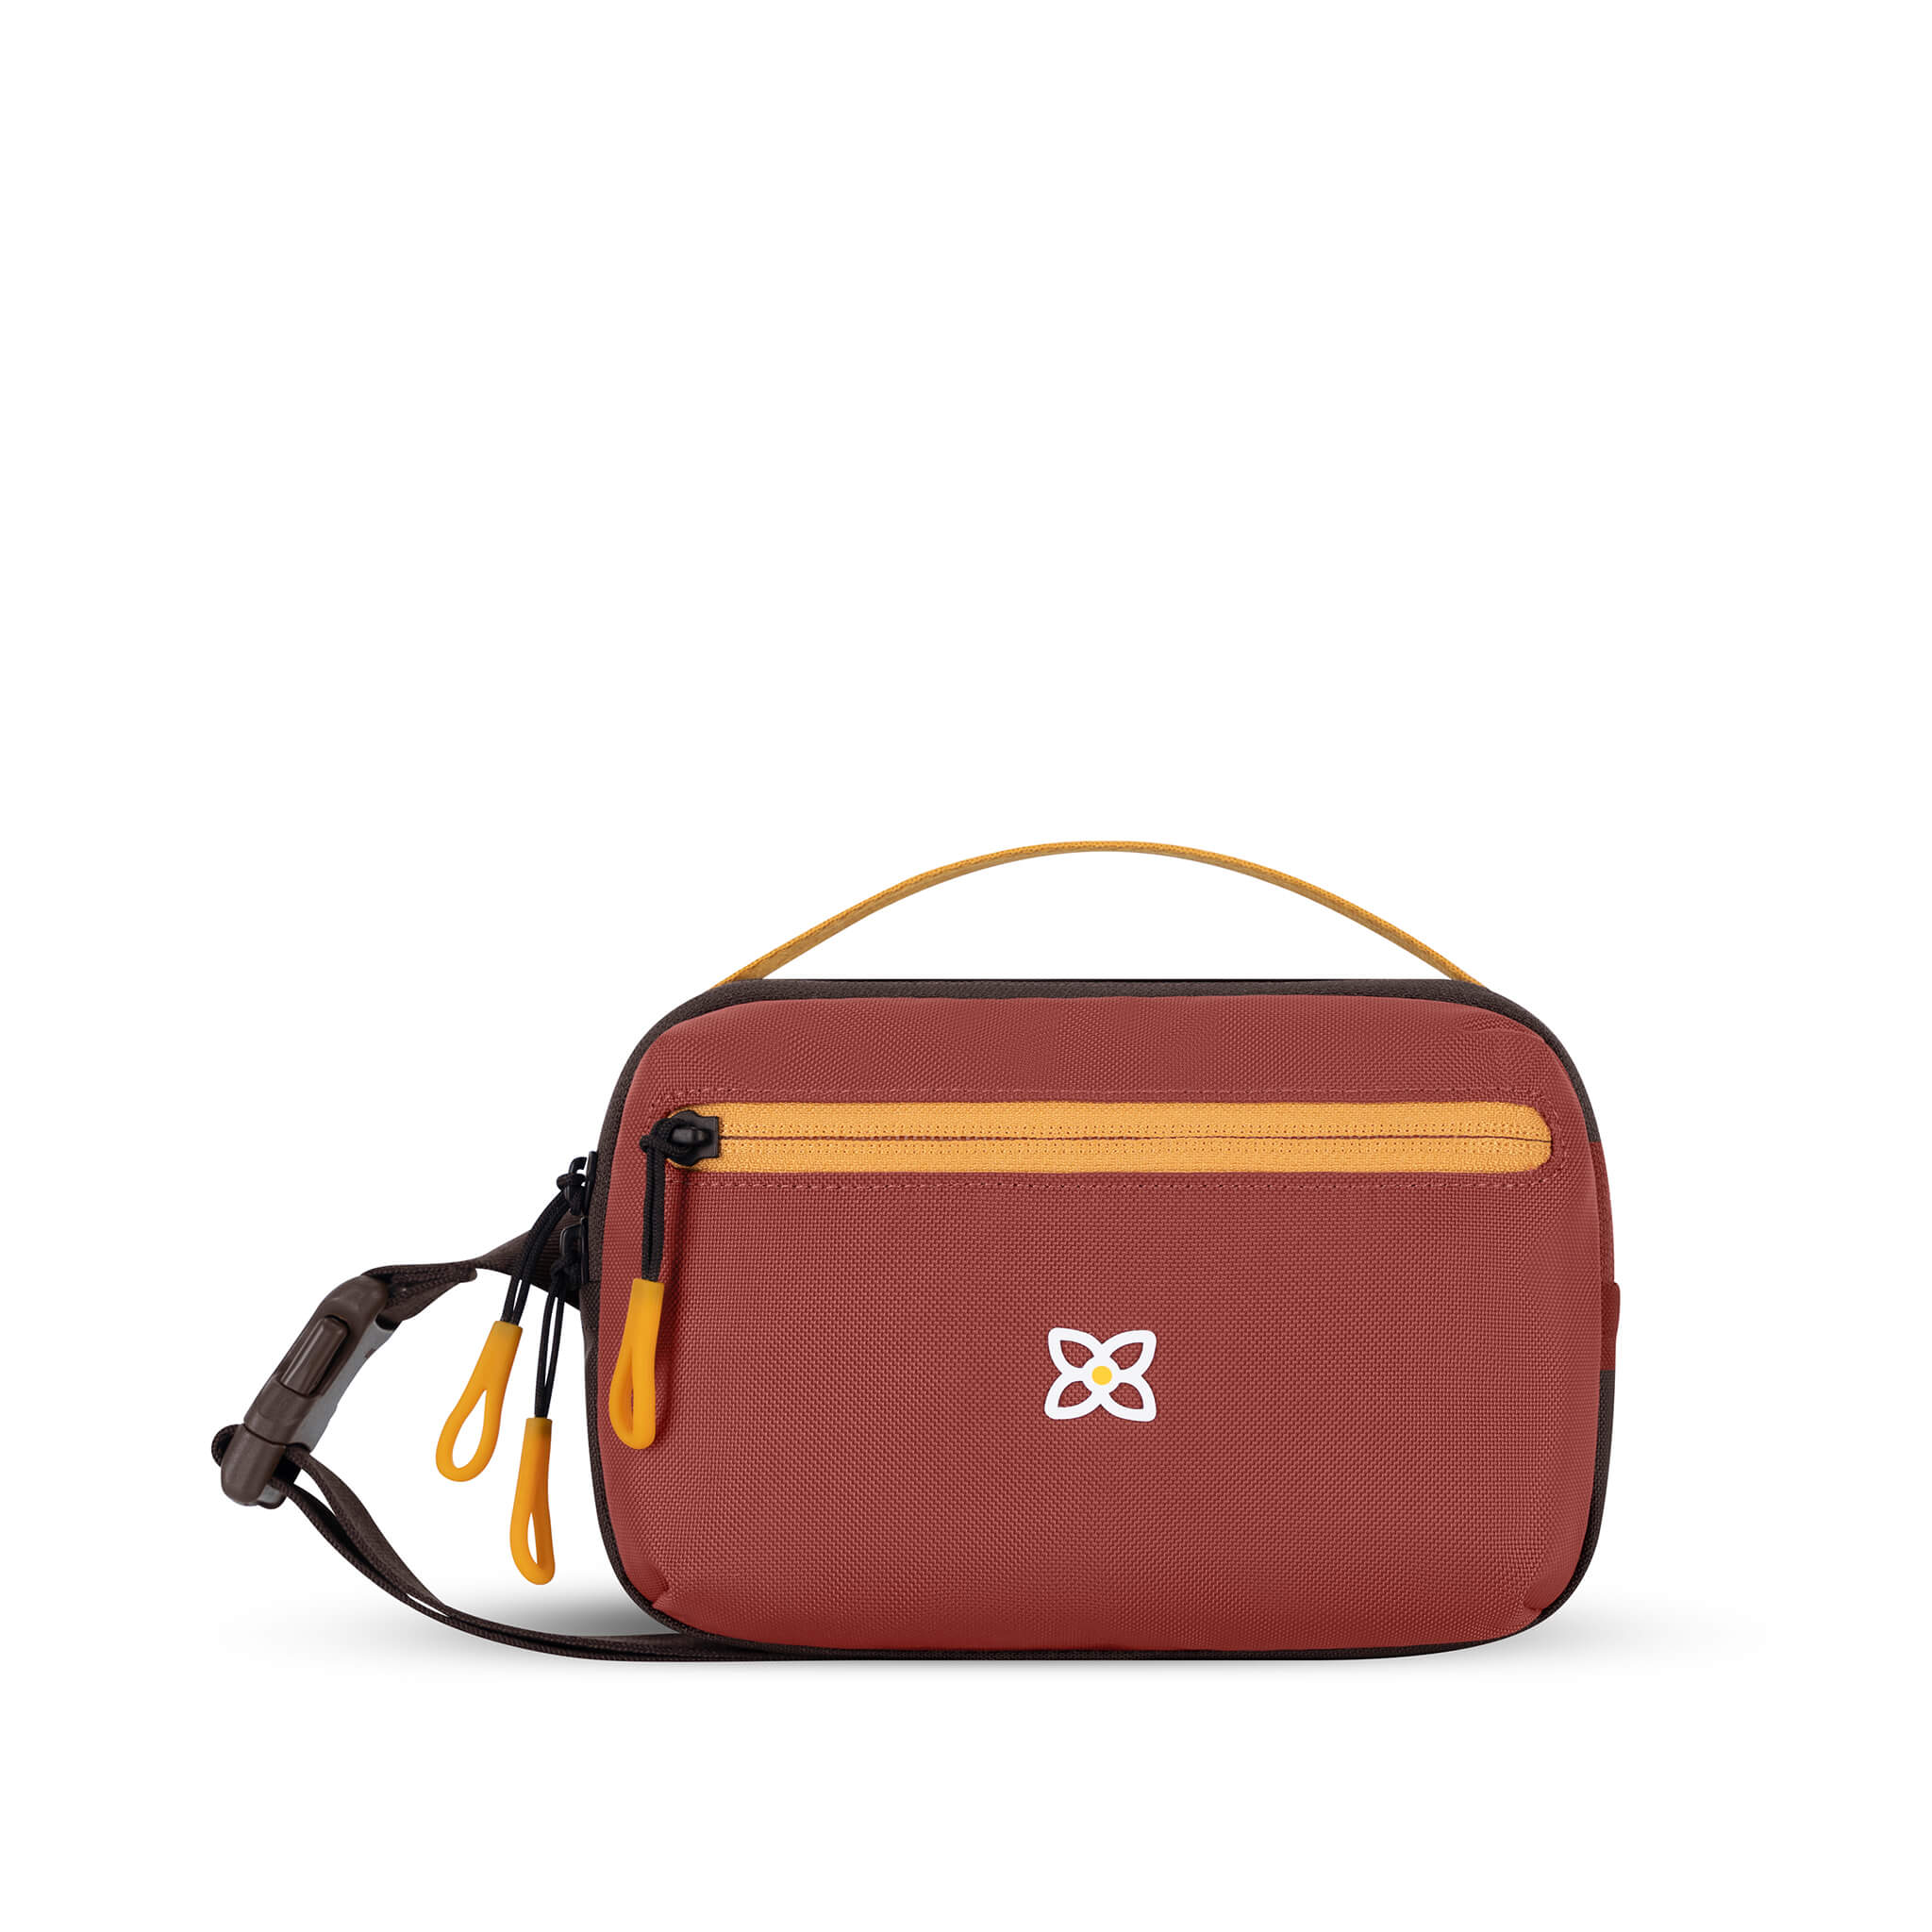 Flat front view of Sherpani hip pack, the Hyk in Cider. Hyk features include an adjustable waist strap, two external zipper pockets, an internal zipper pocket and RFID-blocking technology to block cyber theft. The Cider color is burgundy with yellow accents. 